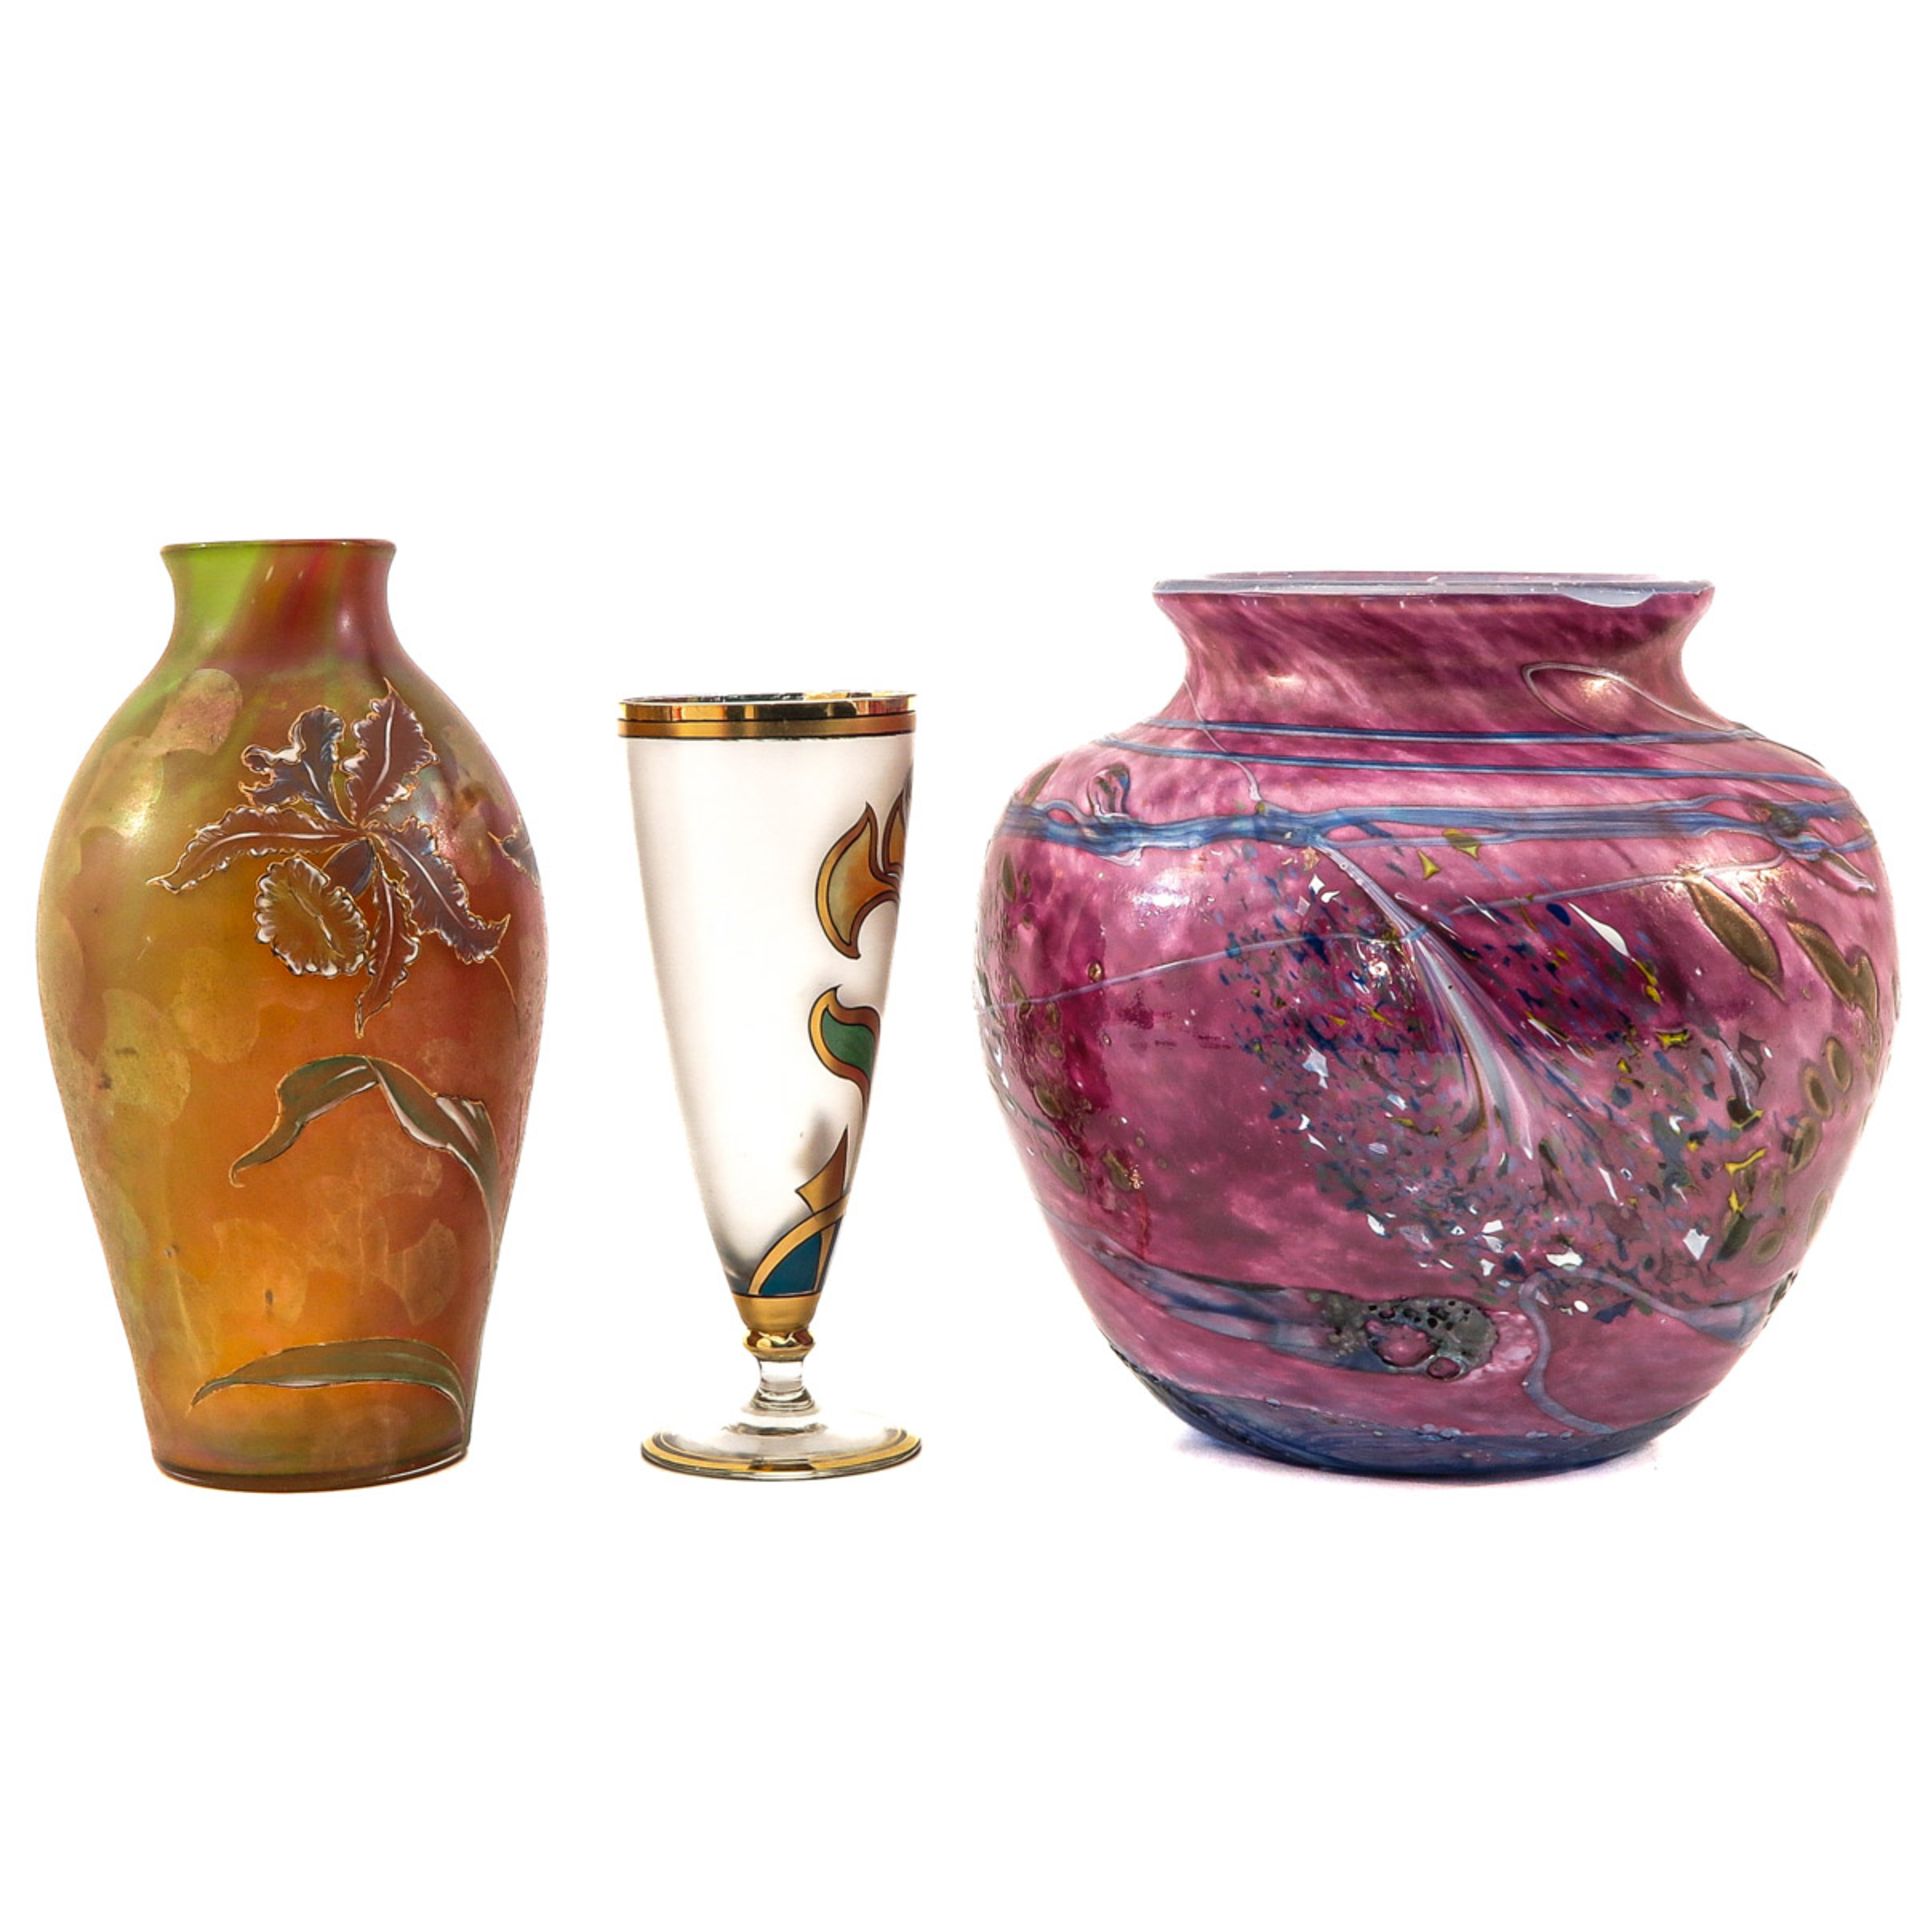 A Collection of 3 Vases - Image 4 of 9